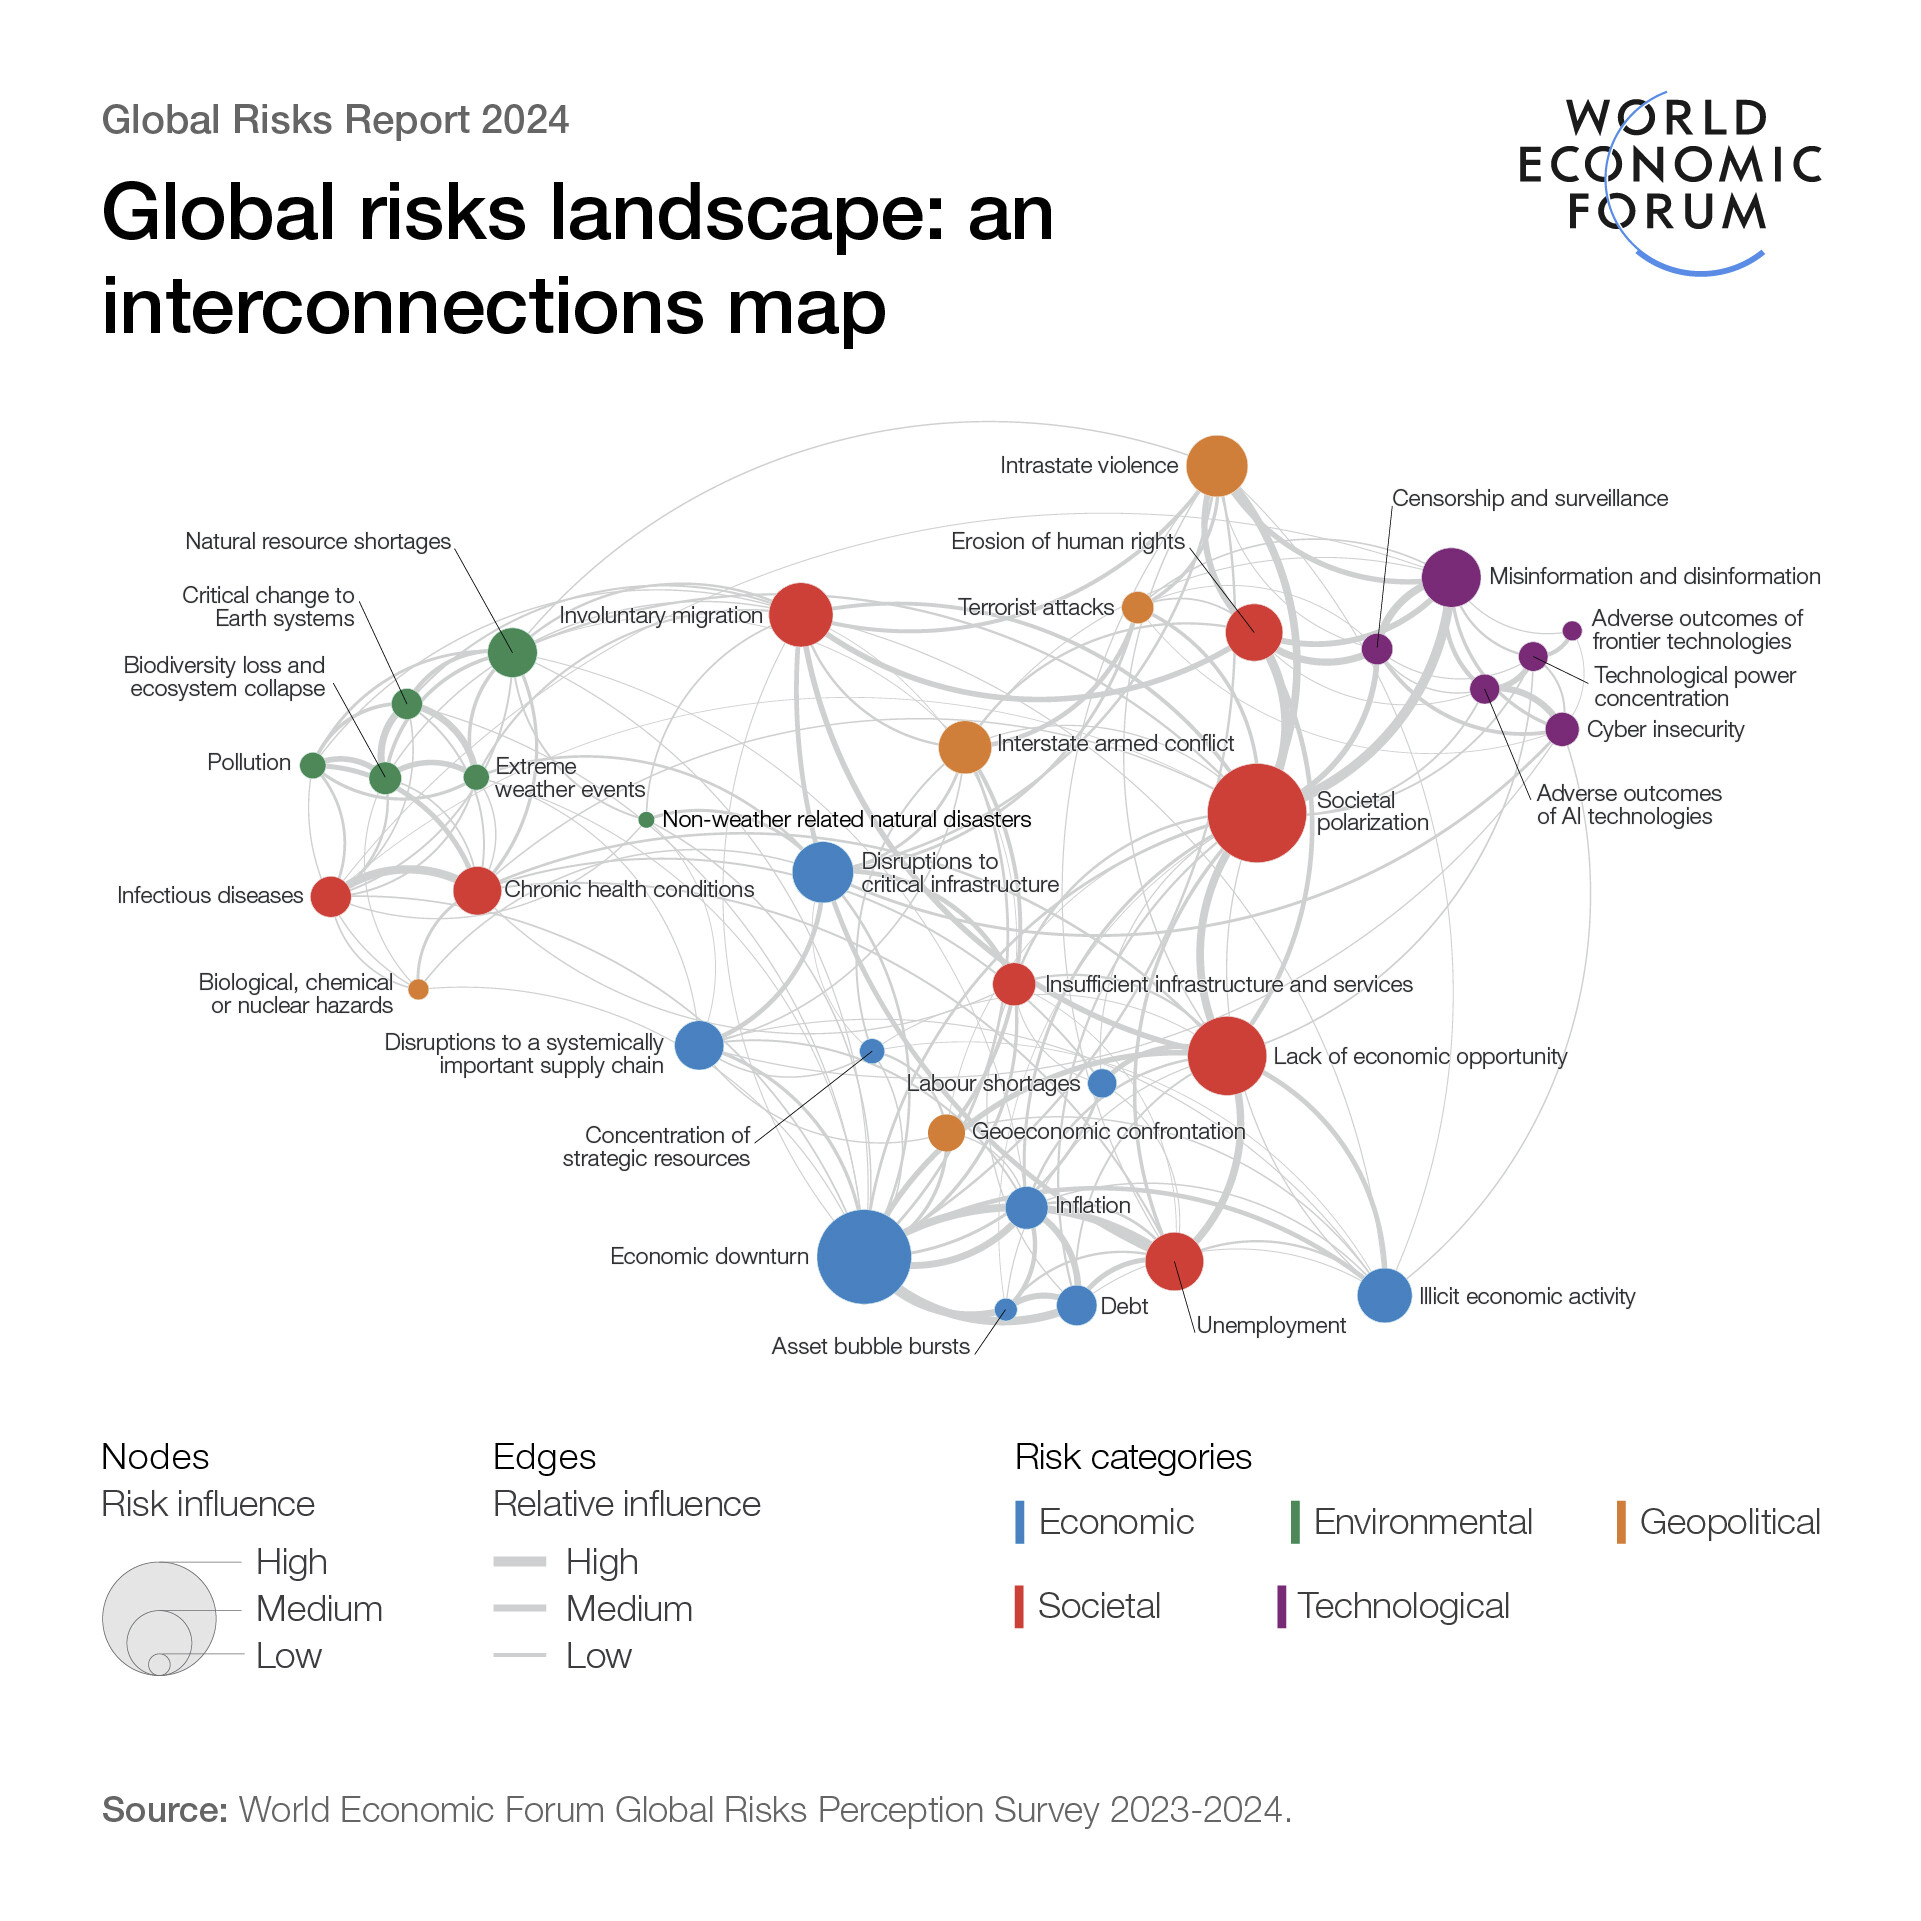 Interconnections map showing the global risks landscape.